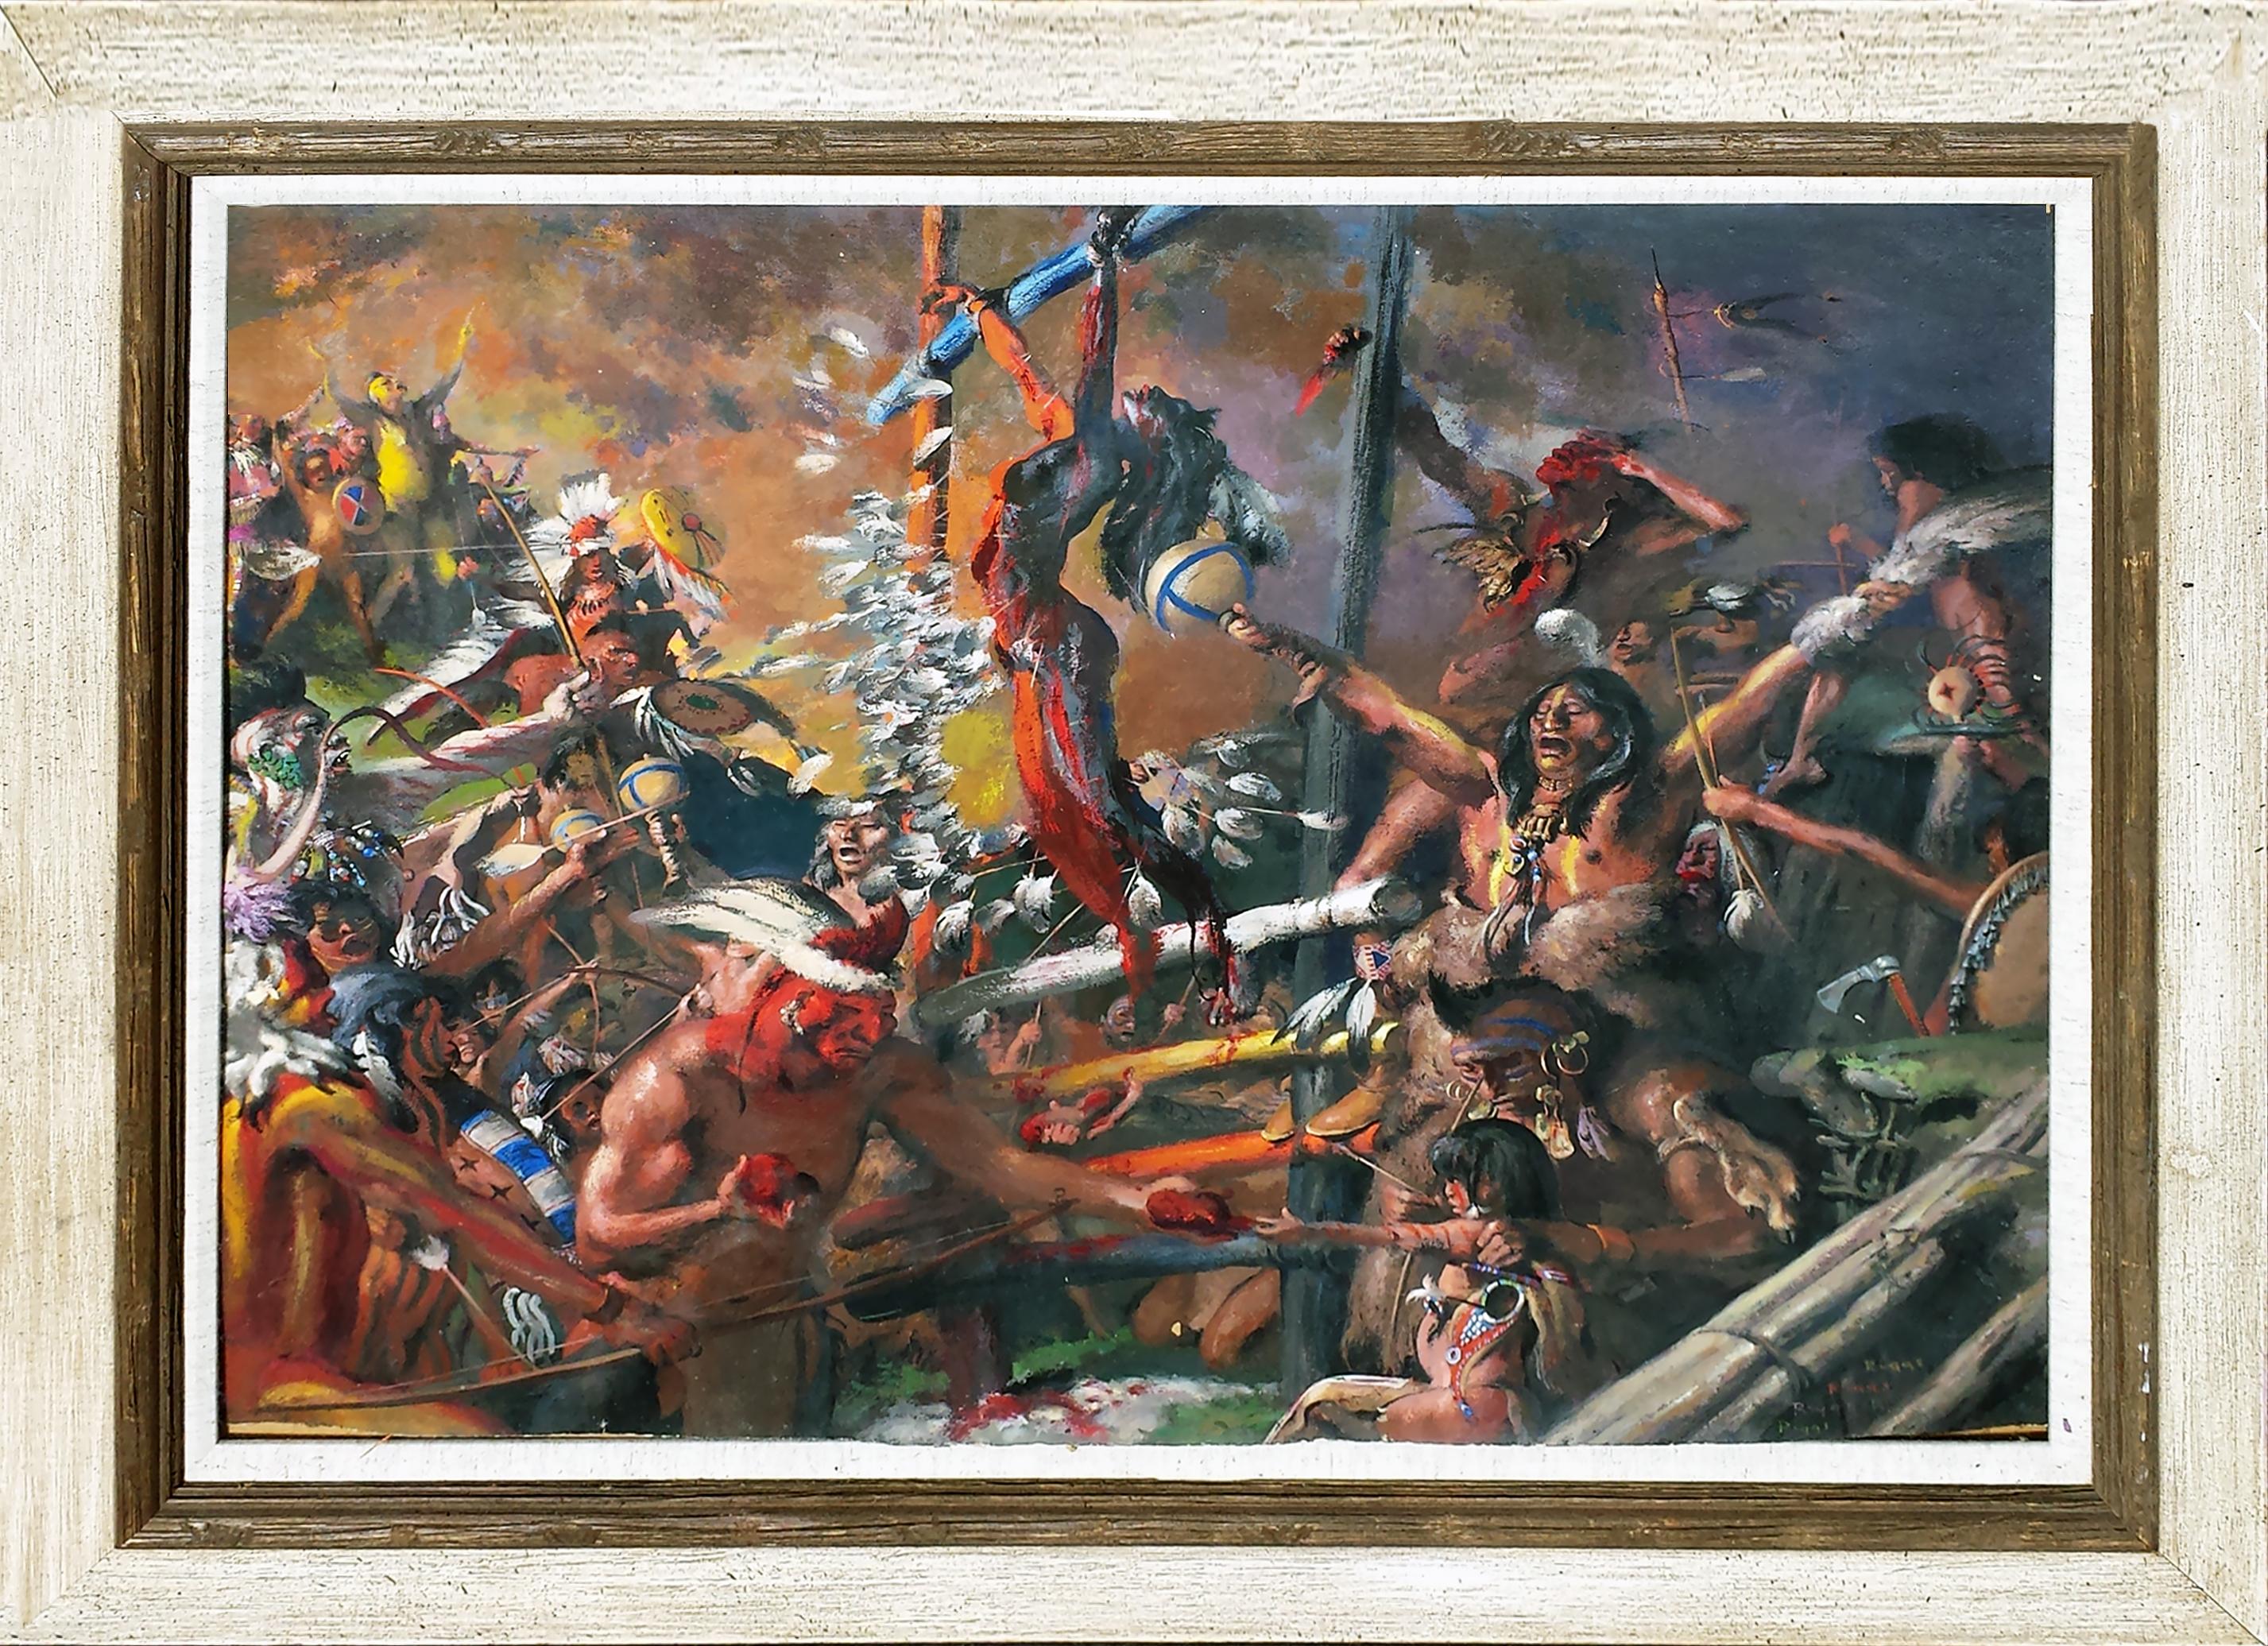  Indian  sacrificial ceremony - Painting by Robert Riggs